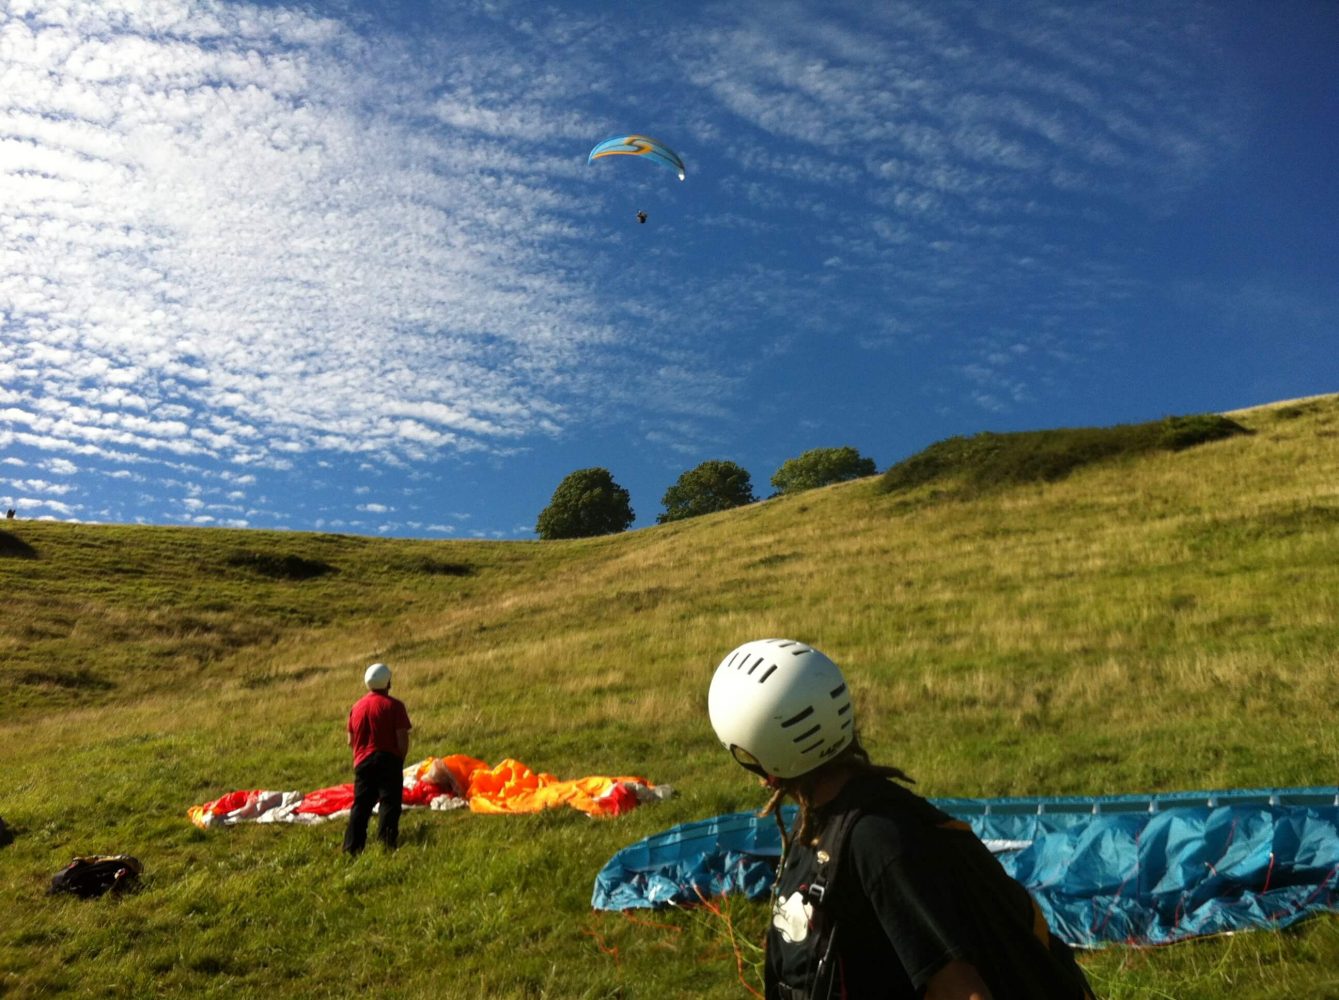 Paragliders on the countryside hill